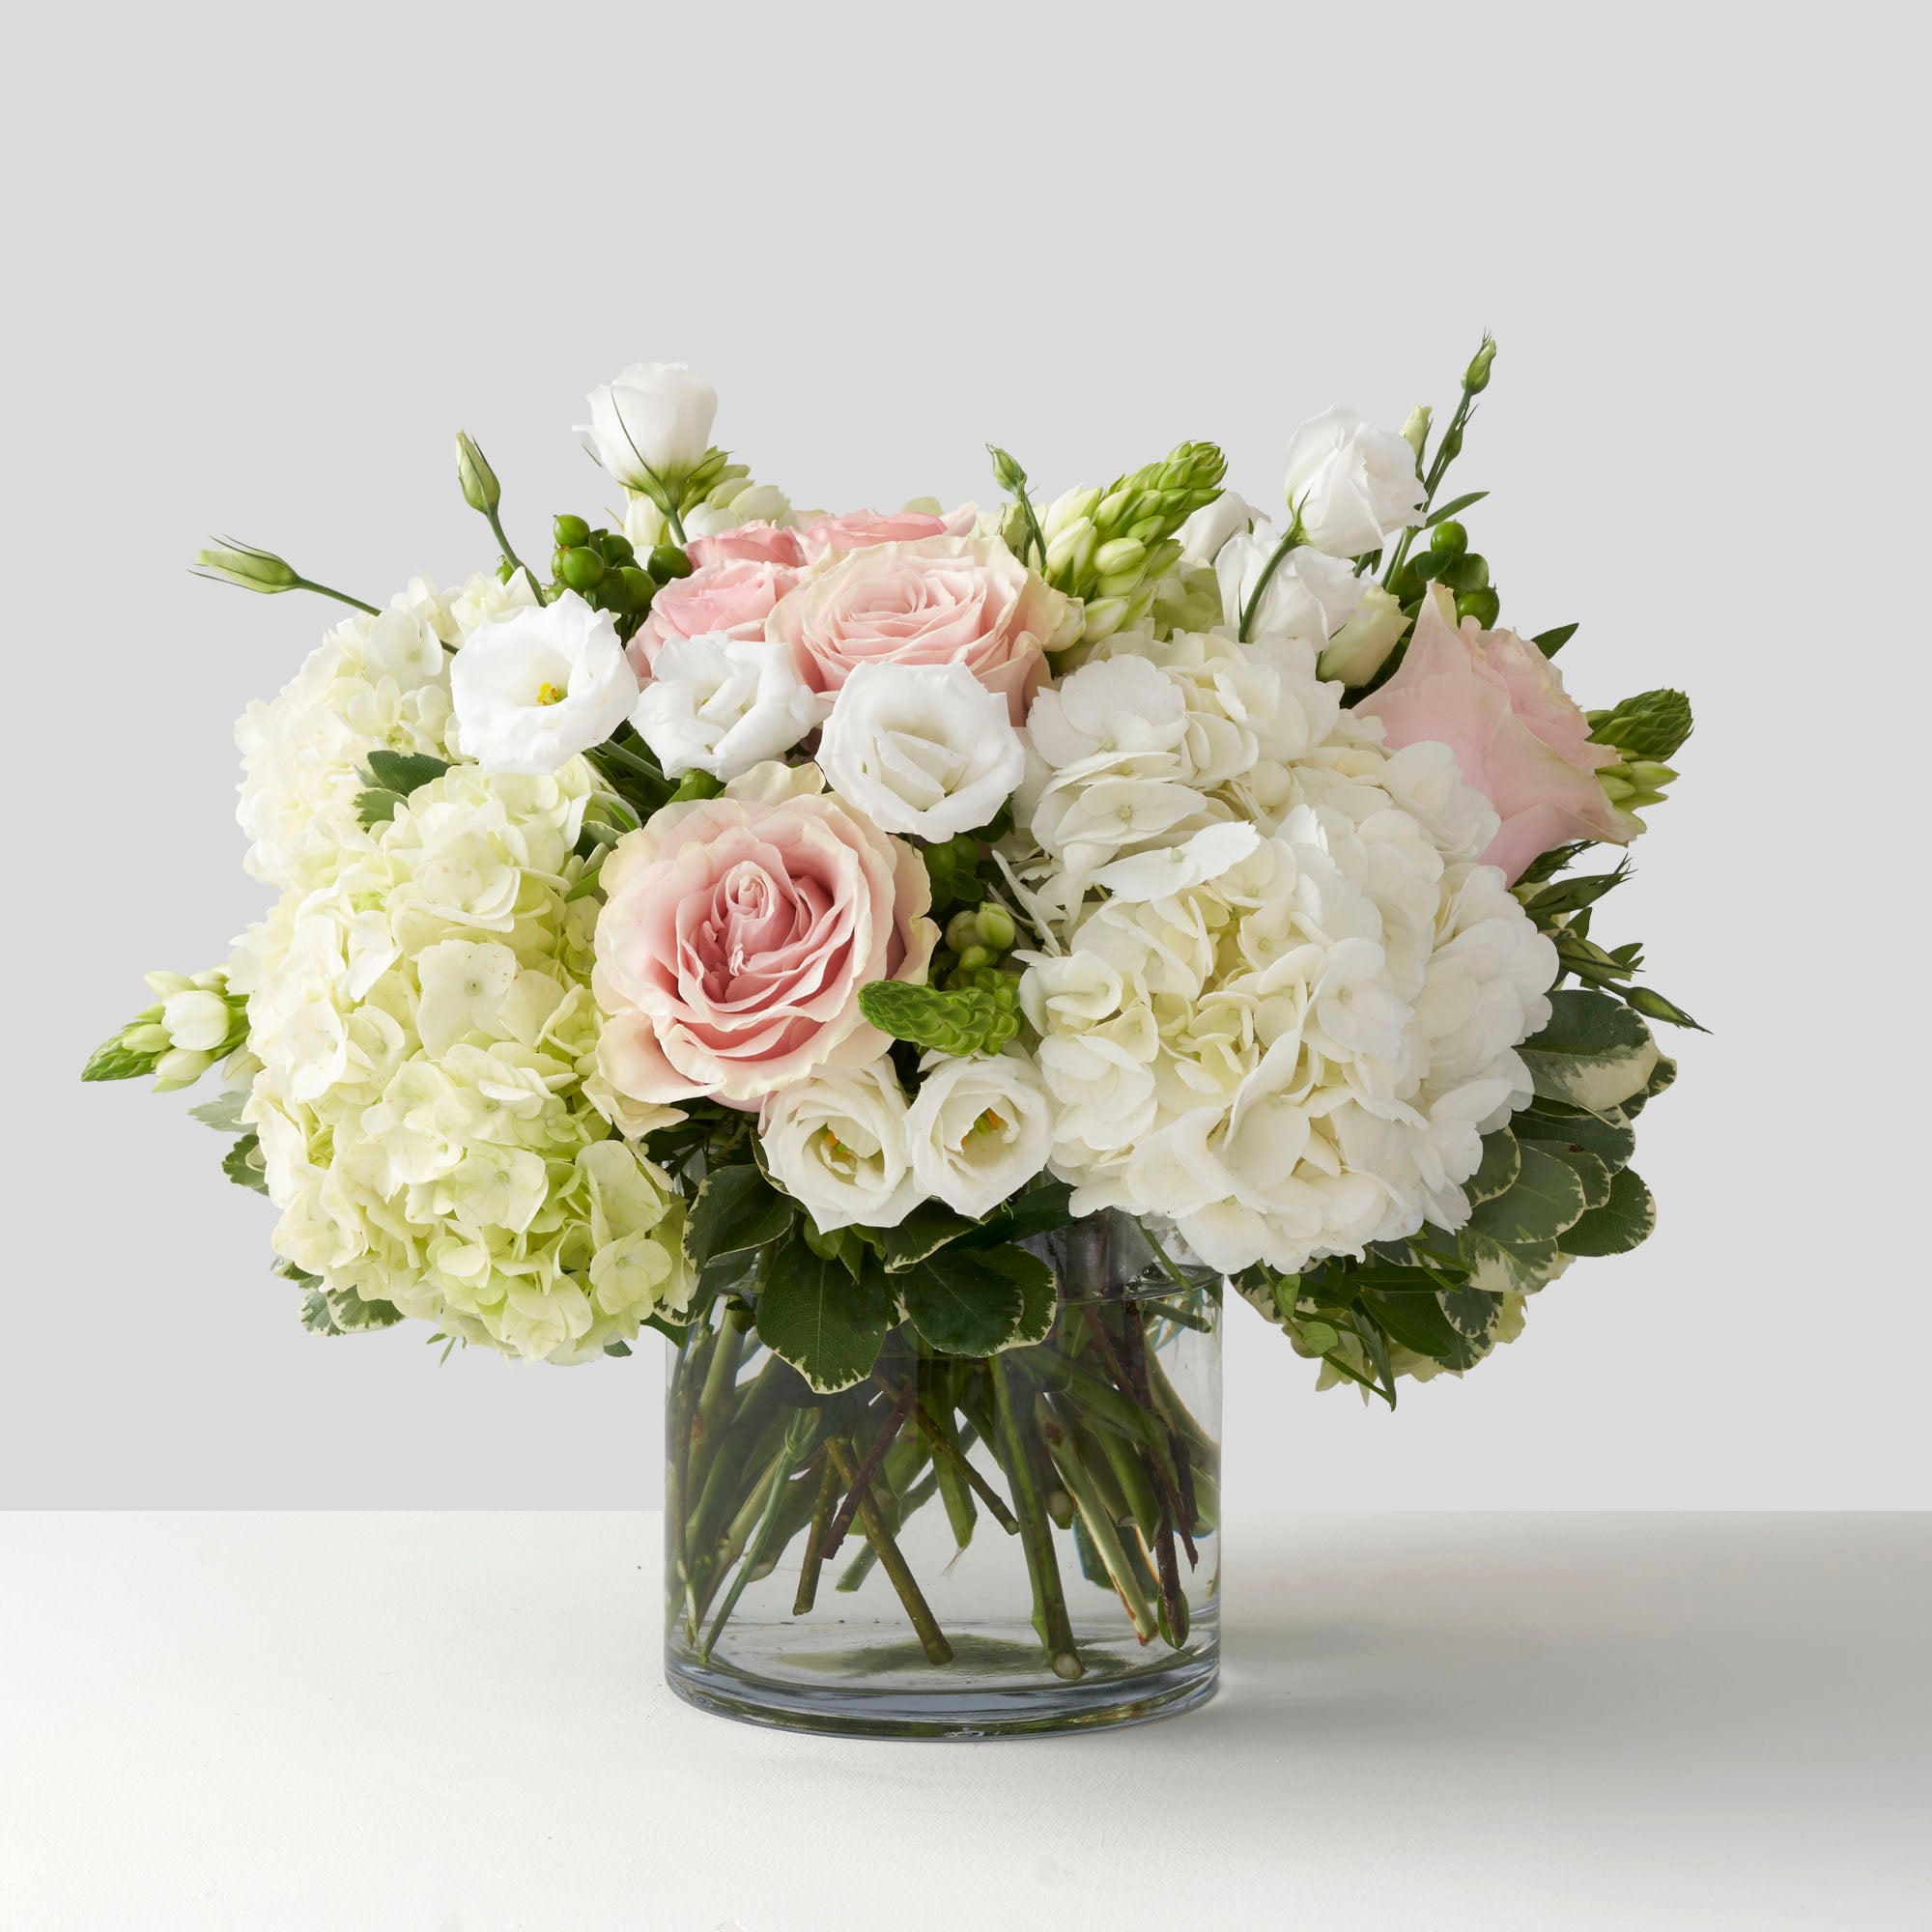 Soft pink white and green flowers arranged in glass vase on white background